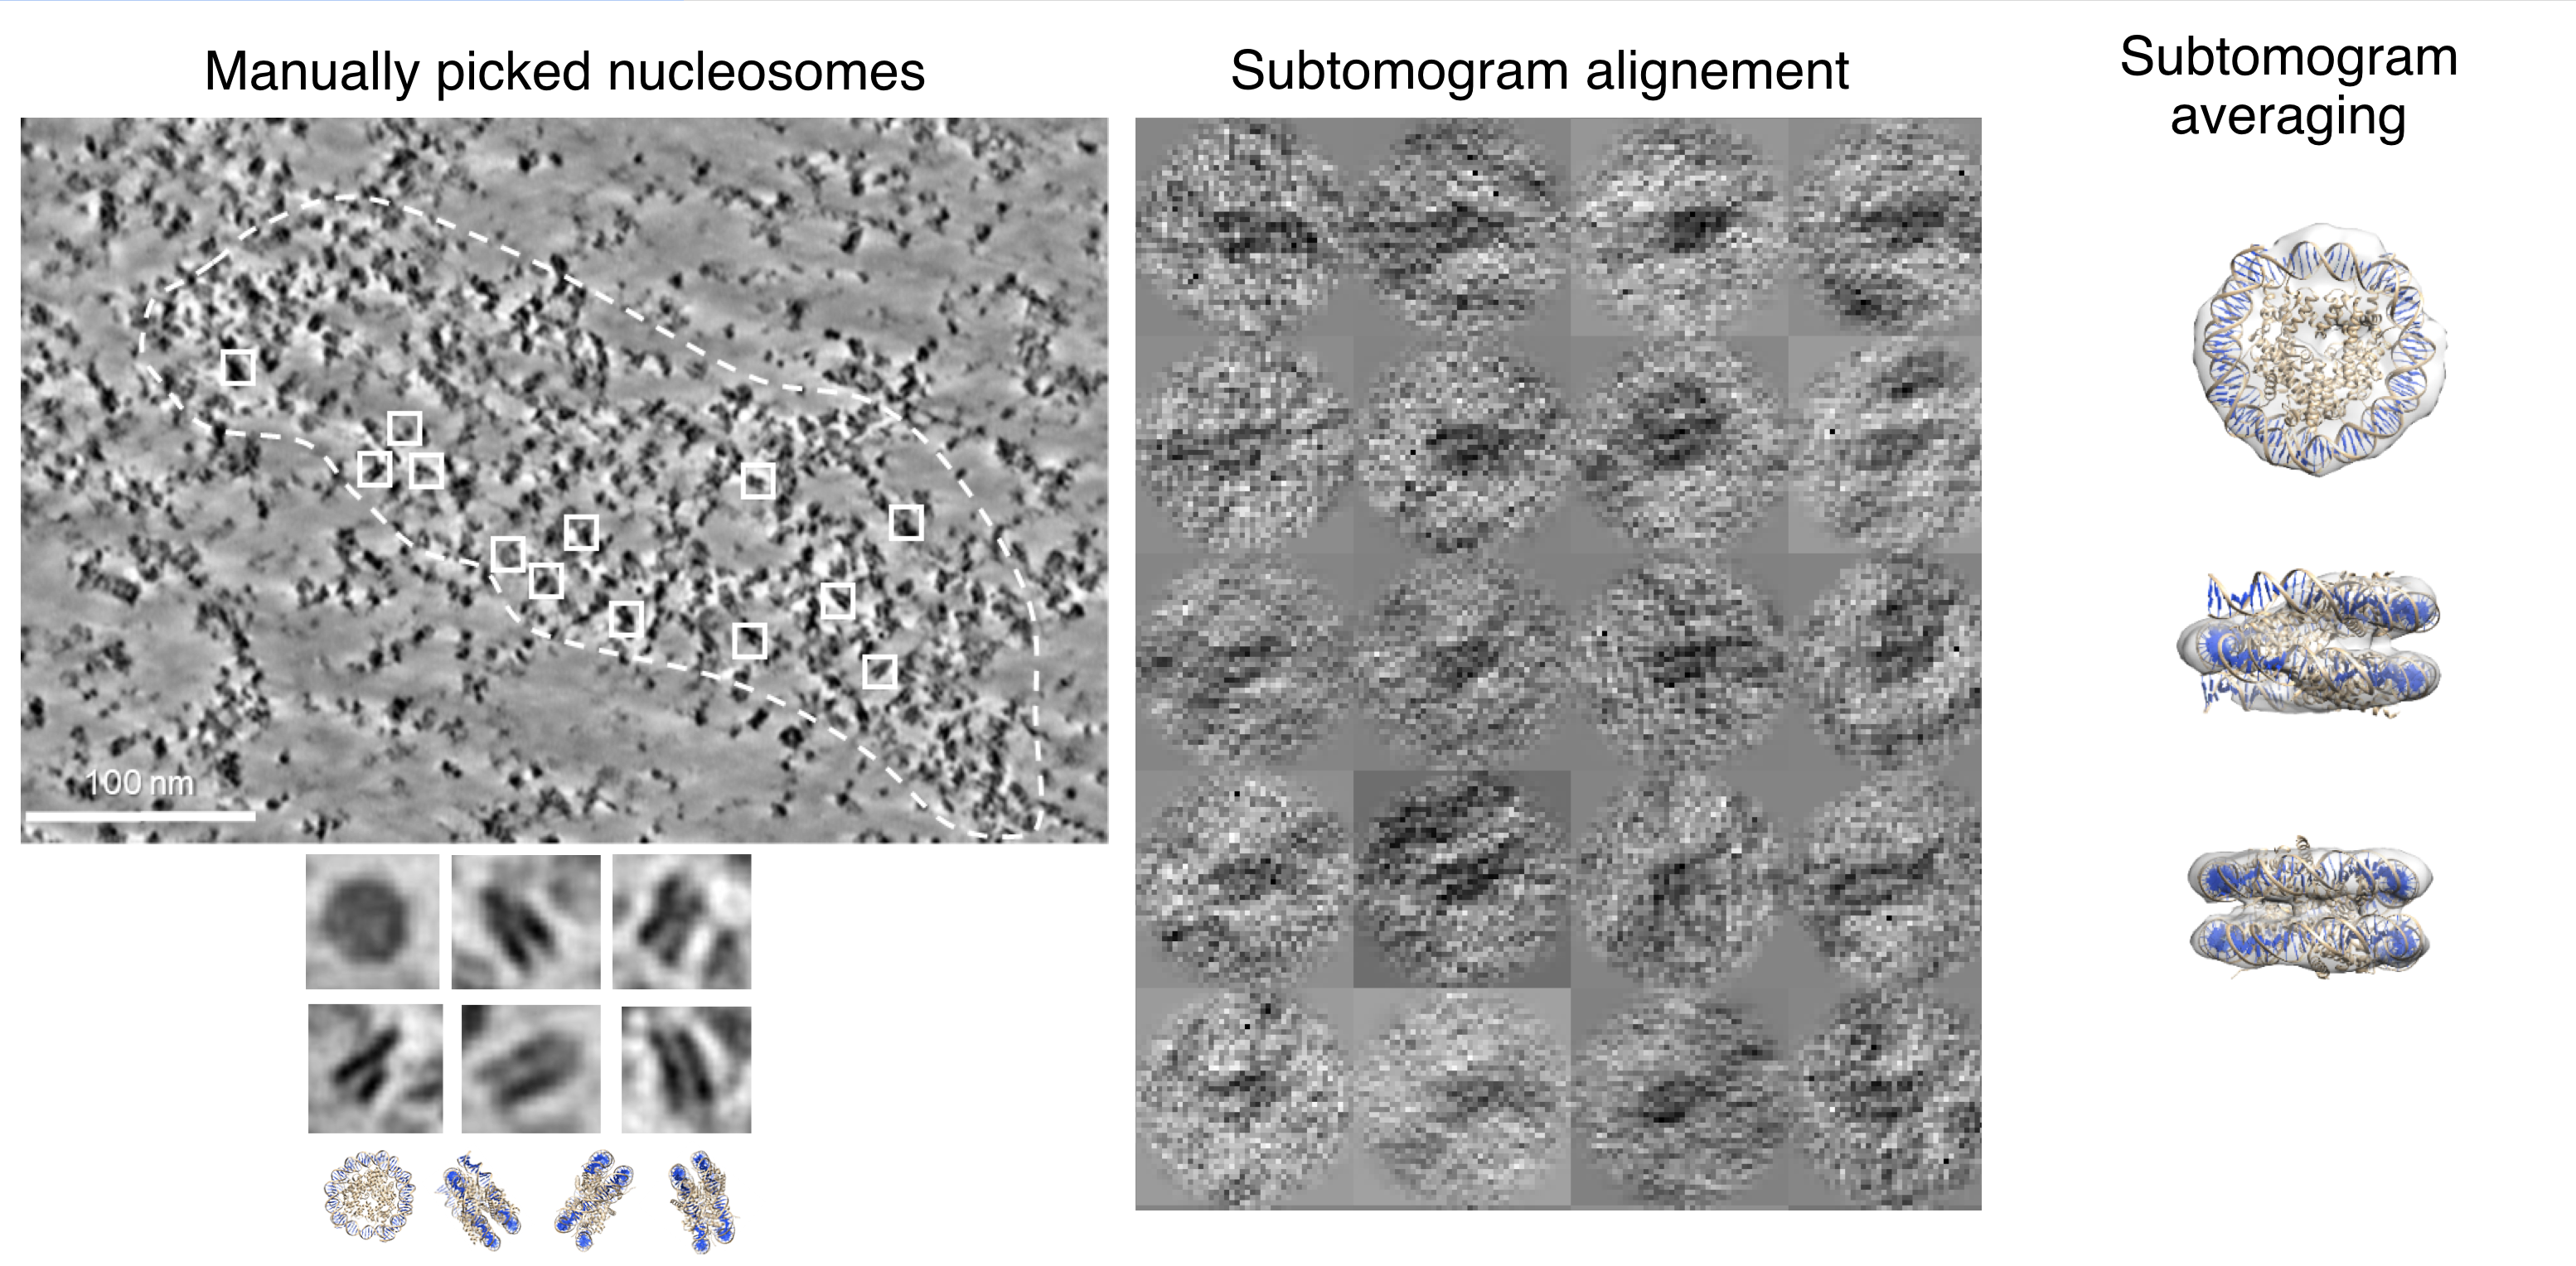 Nucleosome detection in cryo-electron tomography. (Left) localization of nucleosomes in 3D images with DeepFinder. (Right) subtomogram alignment and averaging from the set of detected nucleosomes.